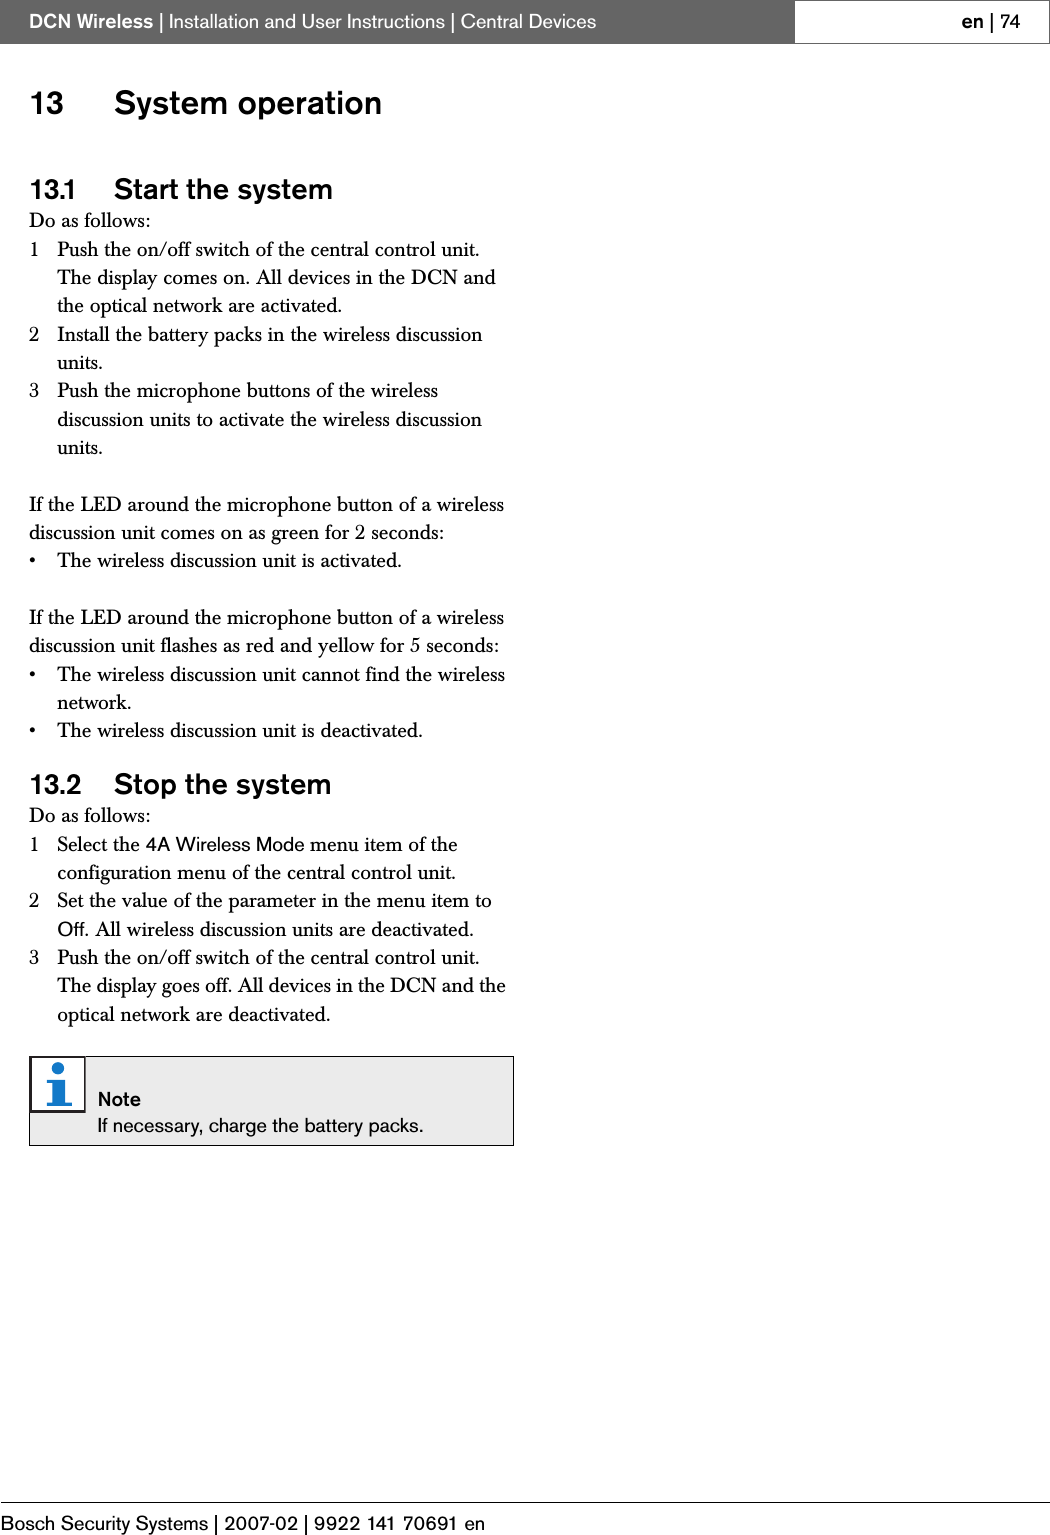 Page 45 of Bosch Security Systems DCNWAP Wireless Access Point User Manual Part 2